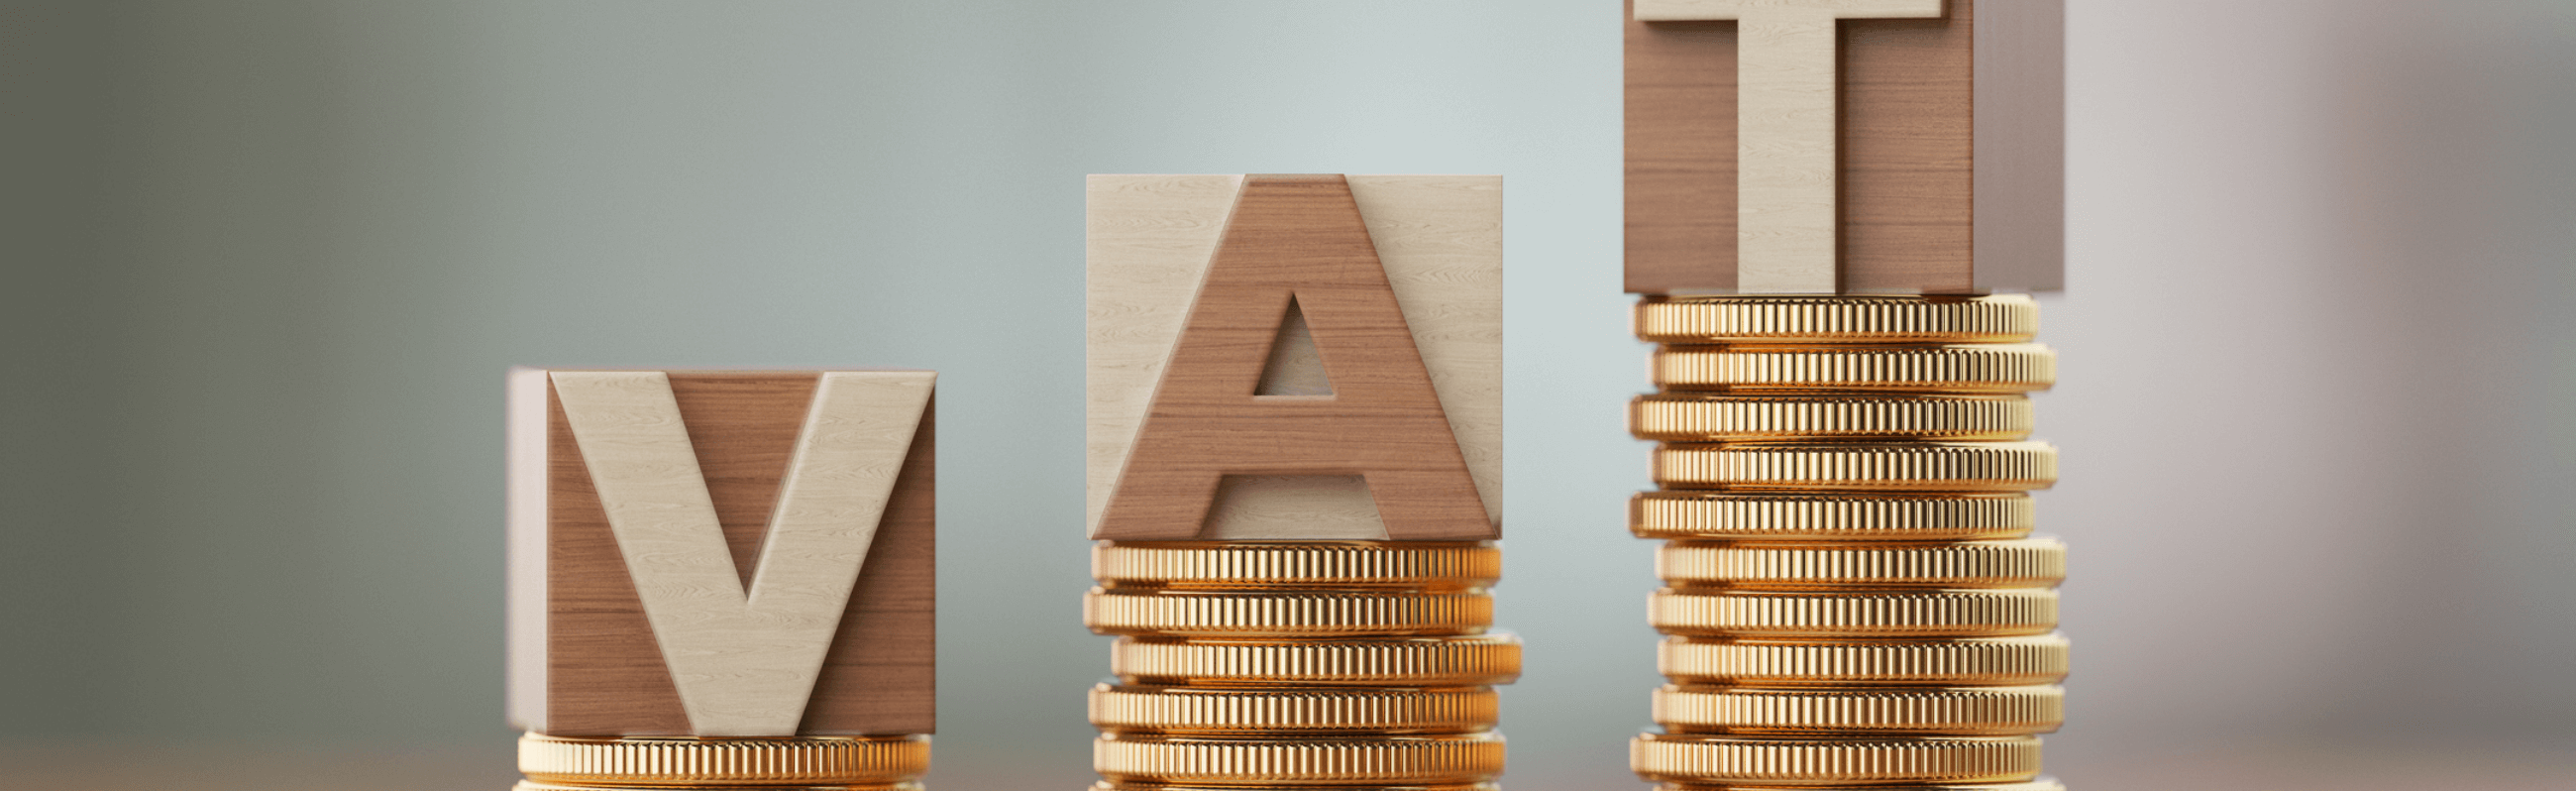 Photograph of a stack of coins